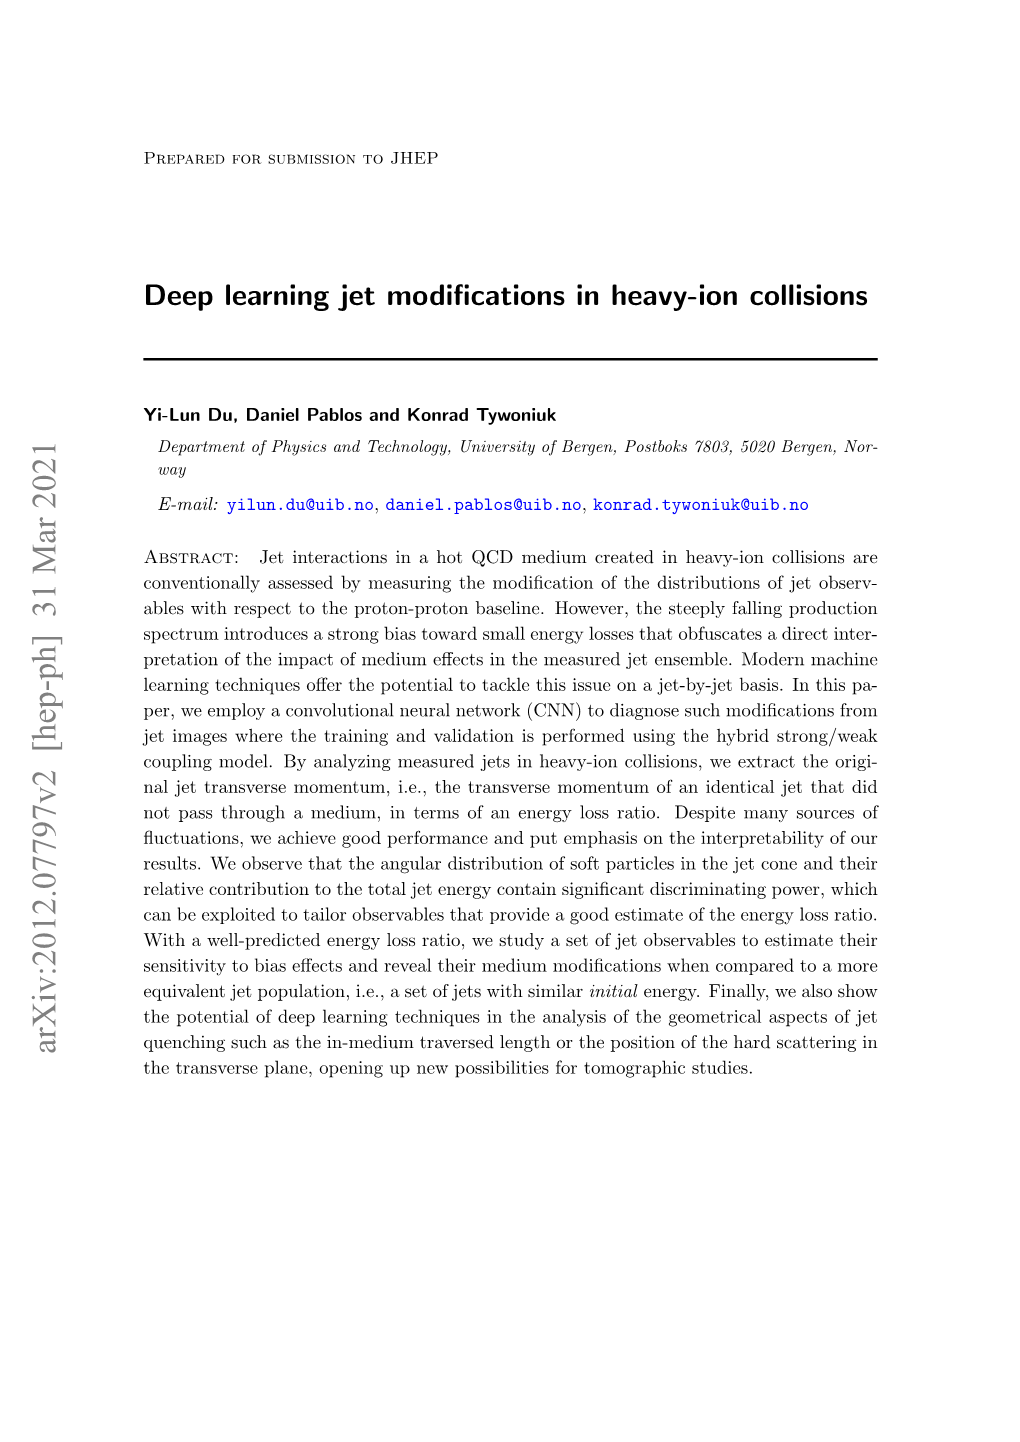 Deep Learning Jet Modifications in Heavy-Ion Collisions